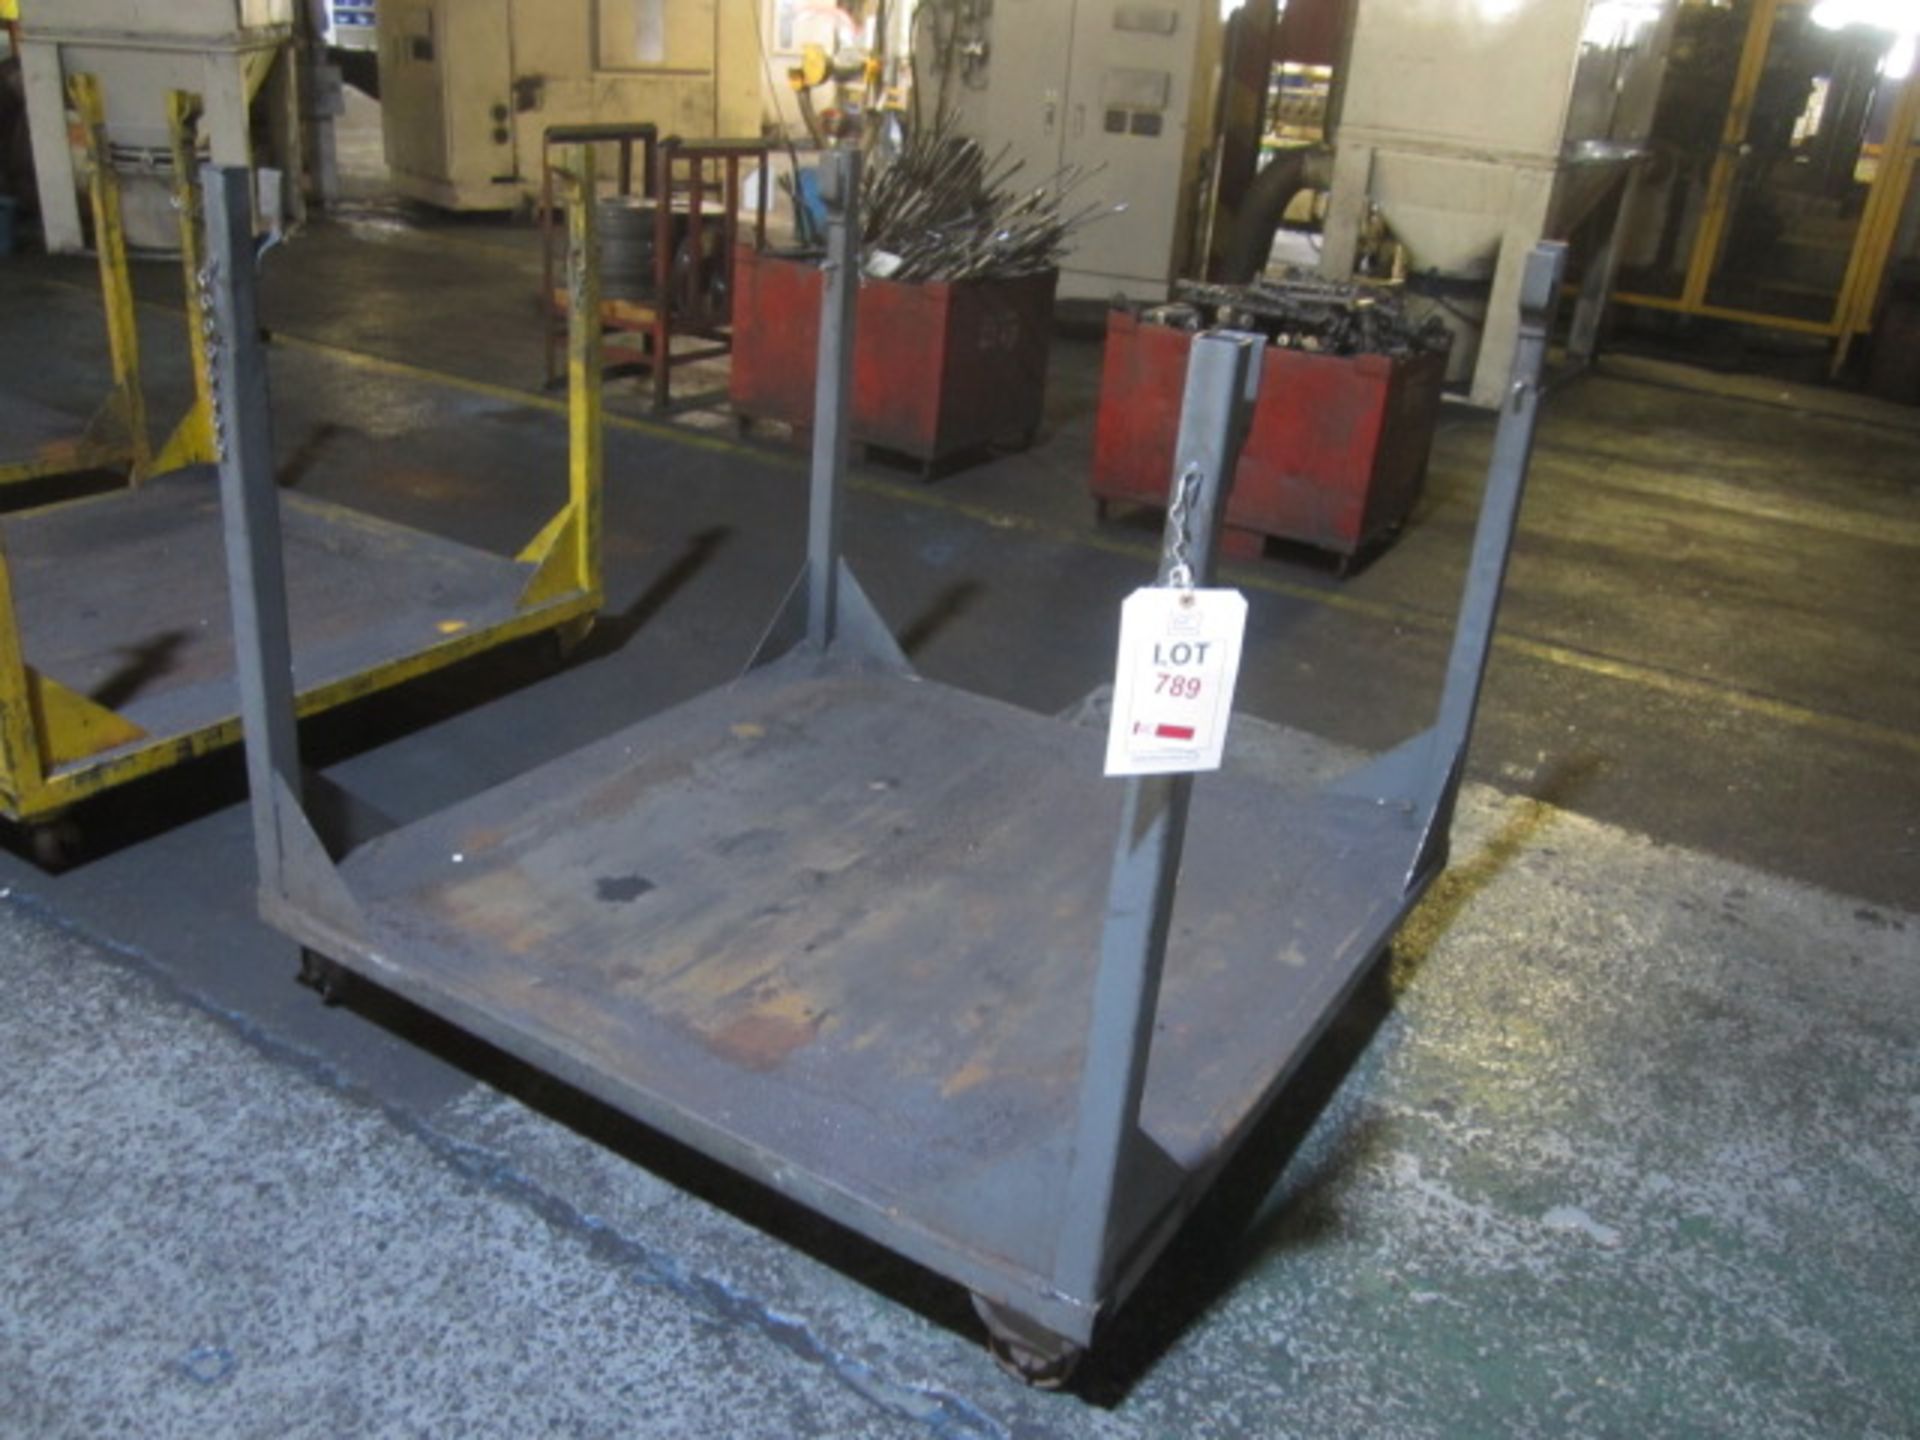 Metal fabricated mobile component trolley, approx. size 1.3 x 1.3m